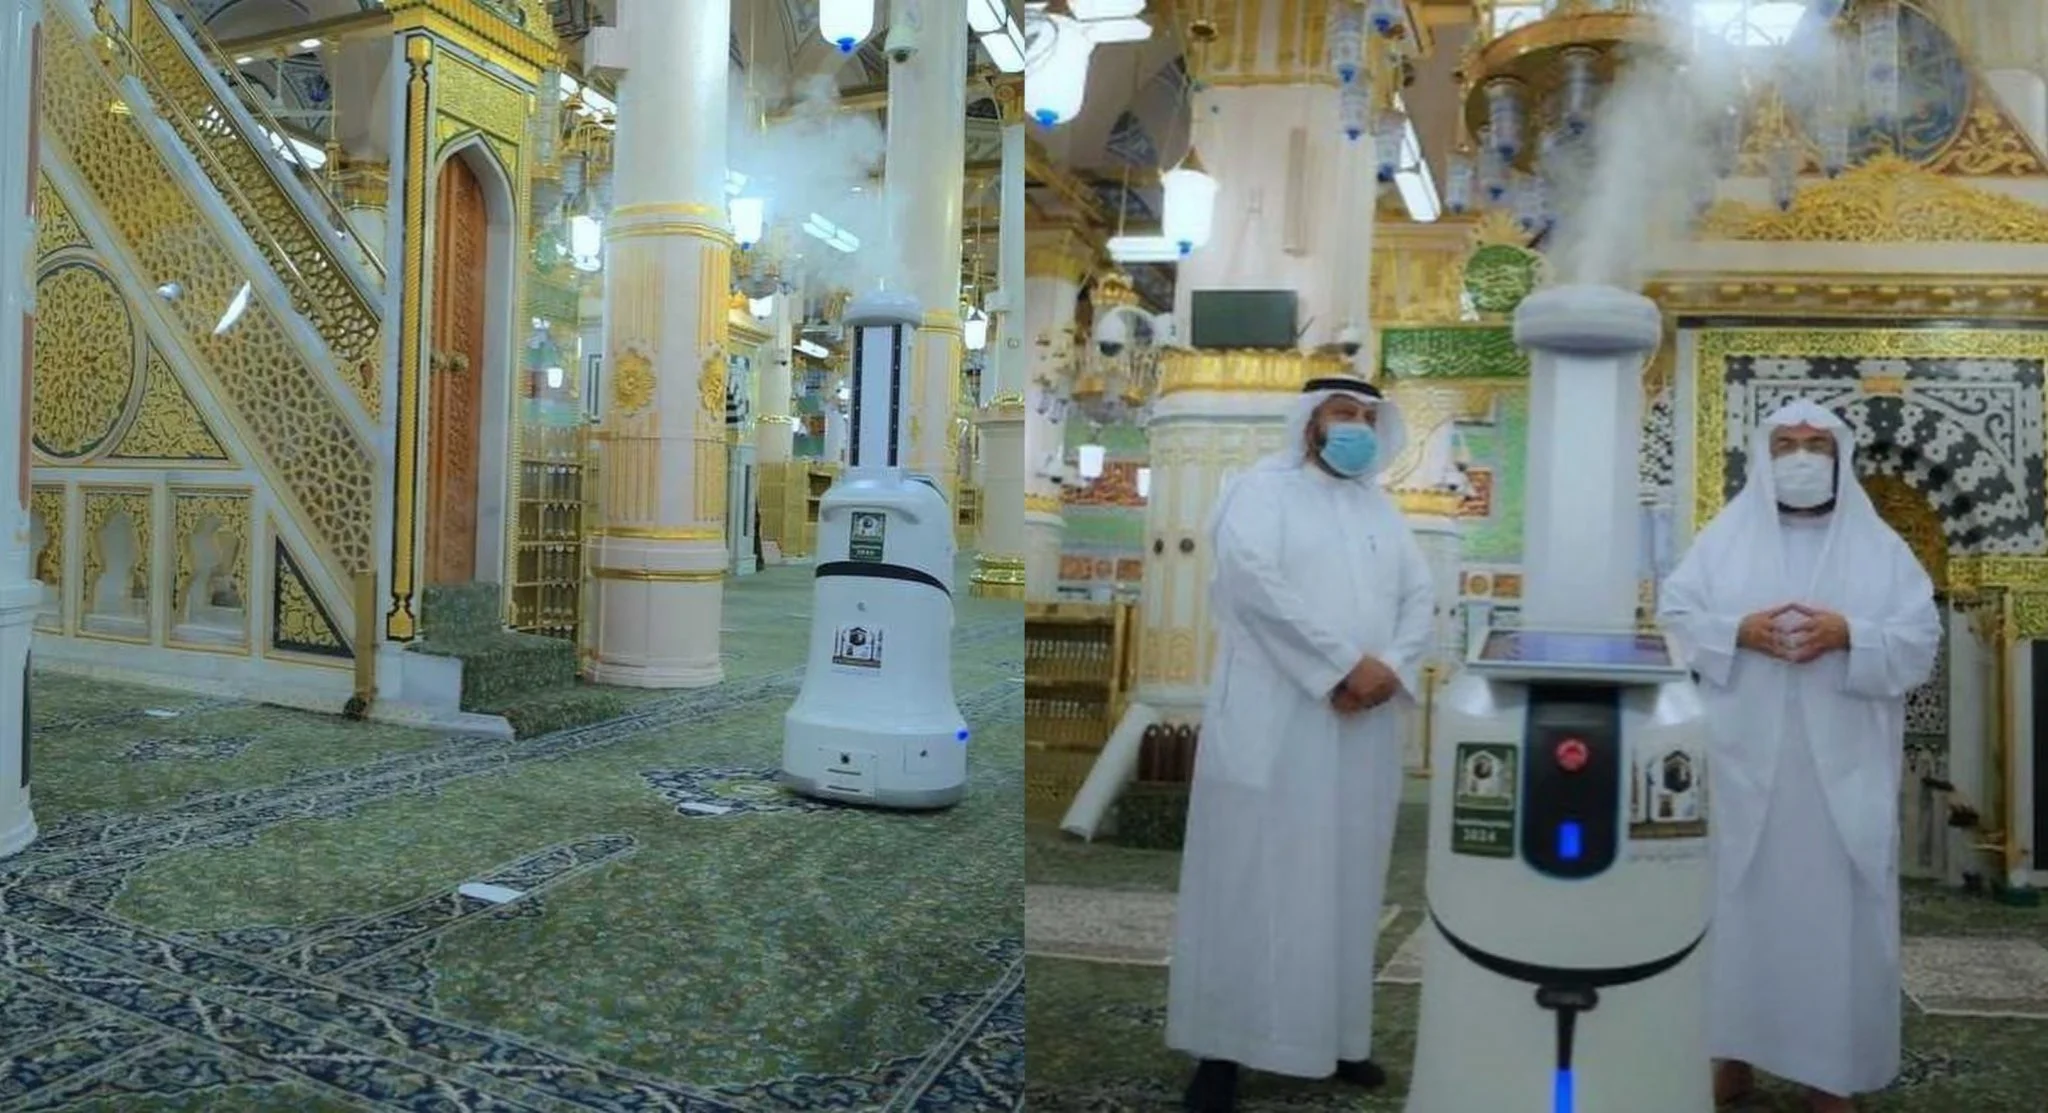 Automatic Robot Sanitizer Introduced in Masjid Nabawi